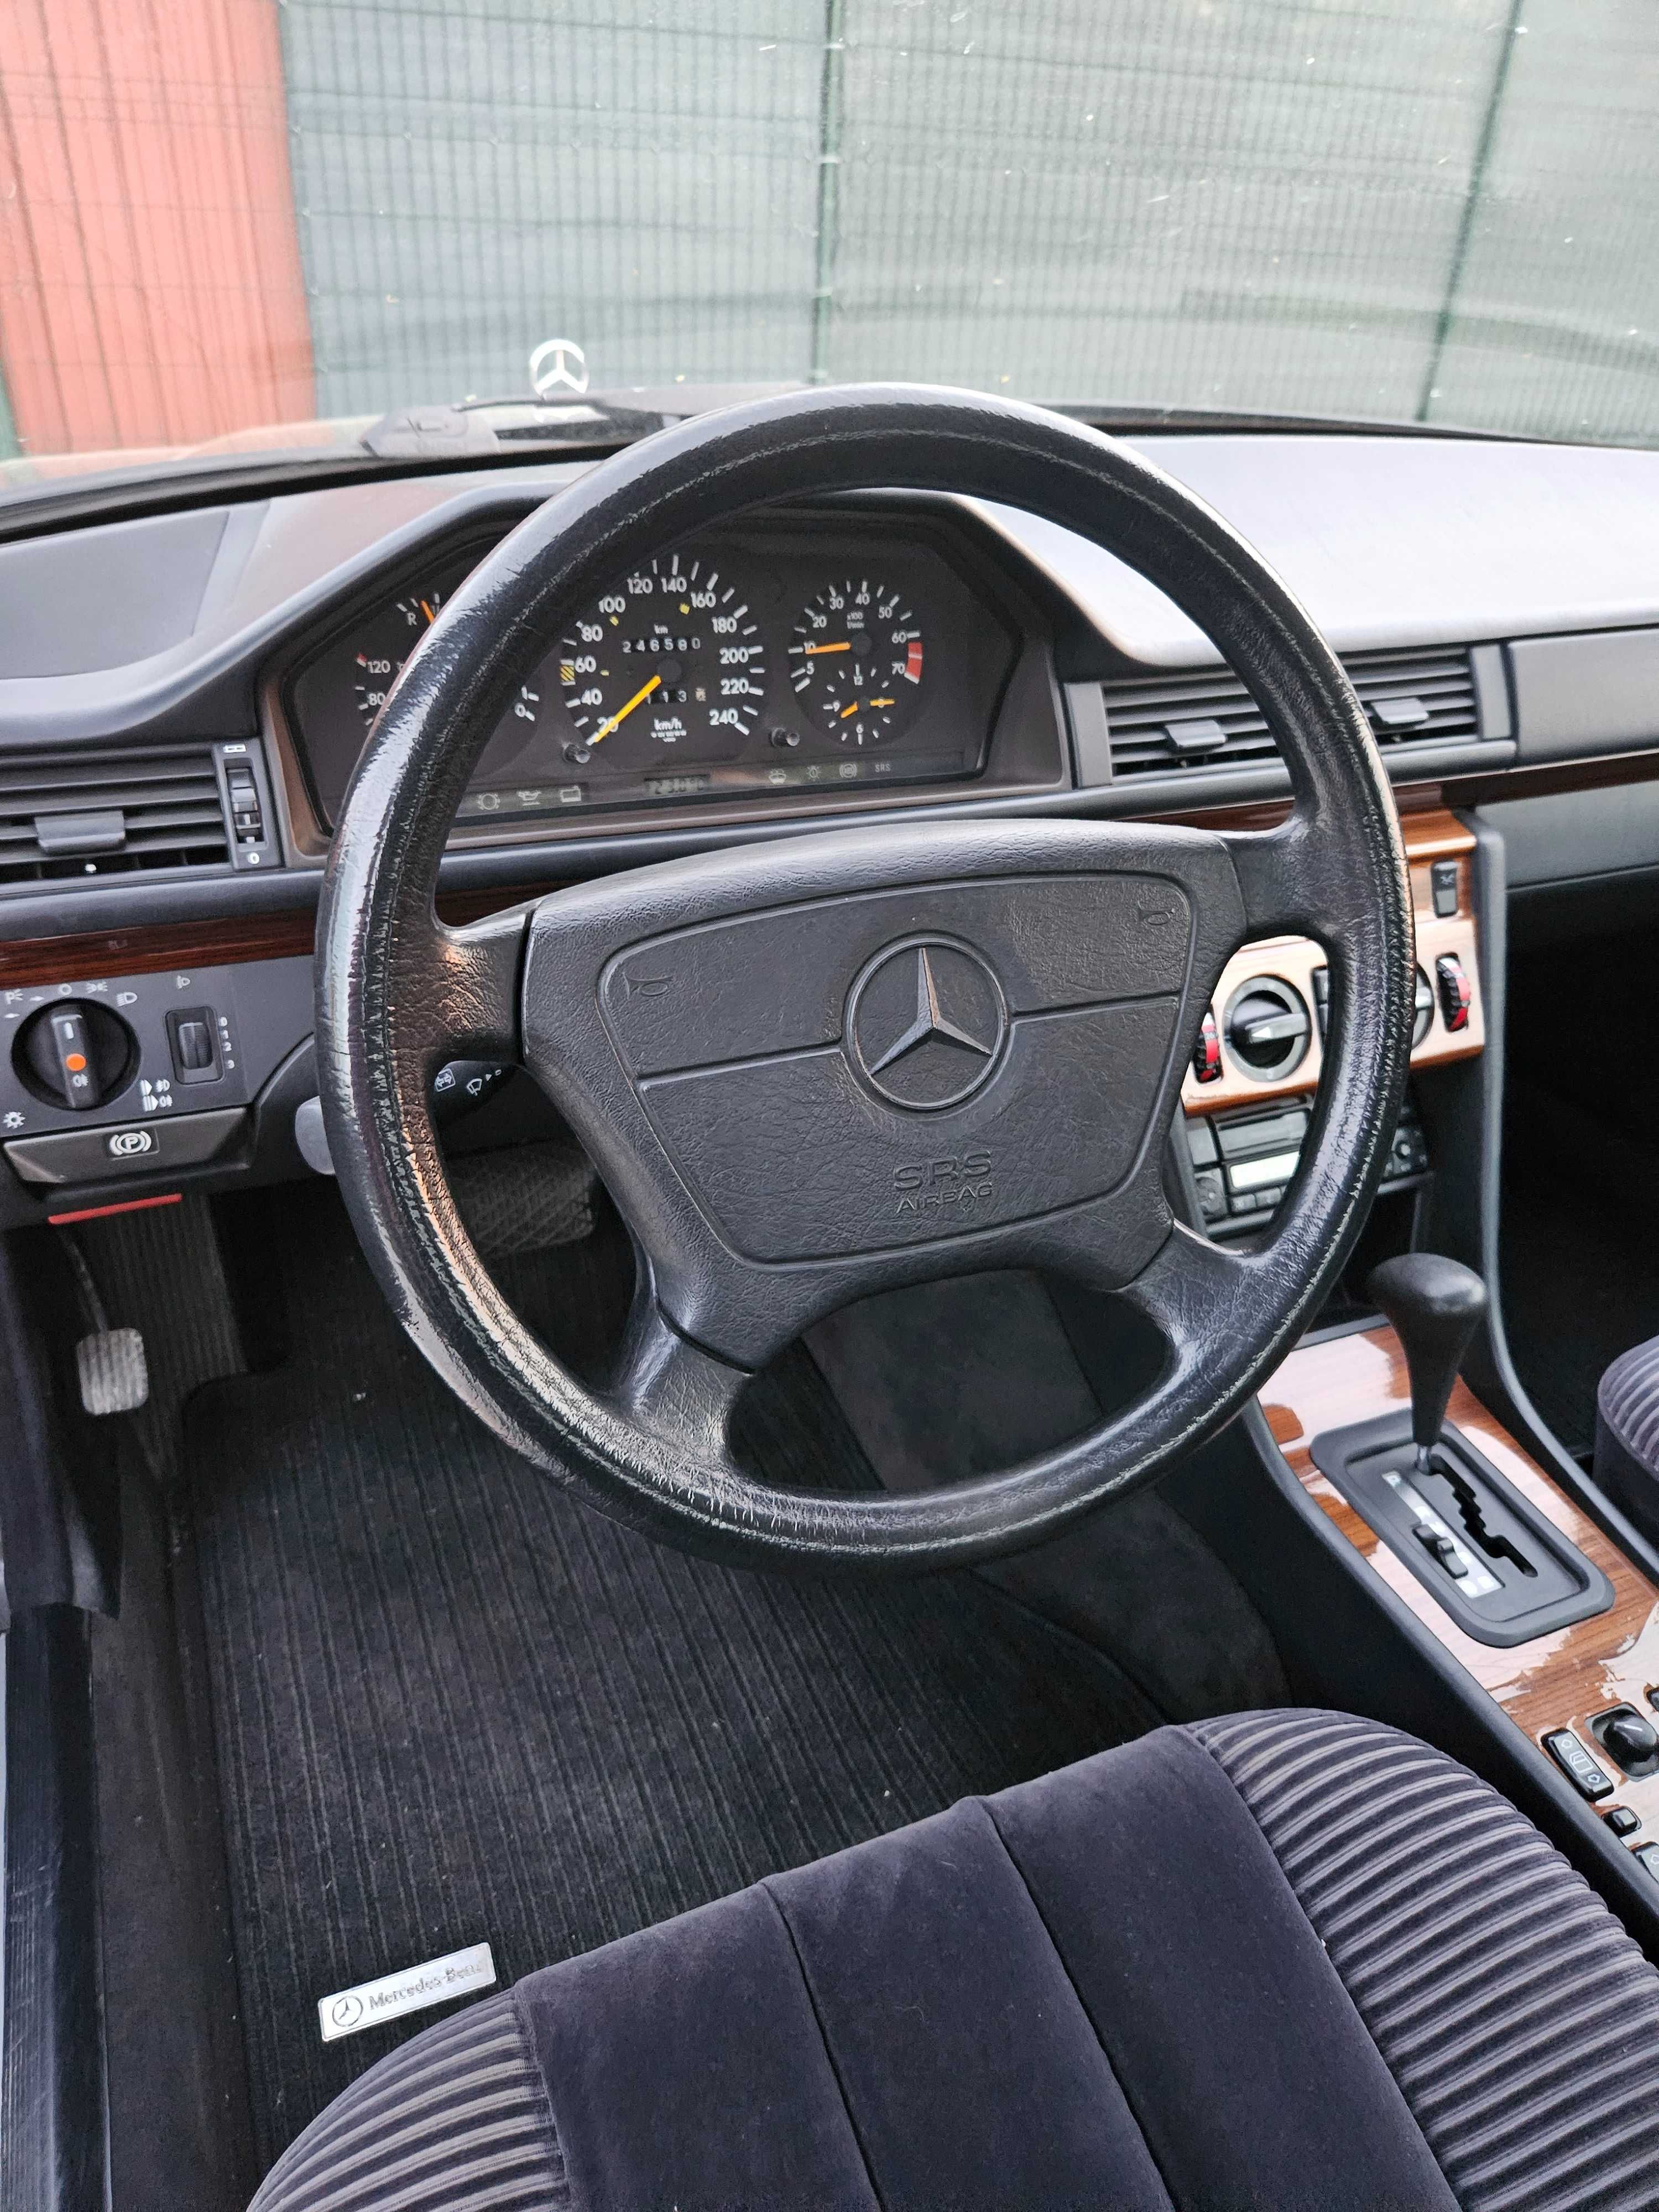 Mercedes W124 200Coupe